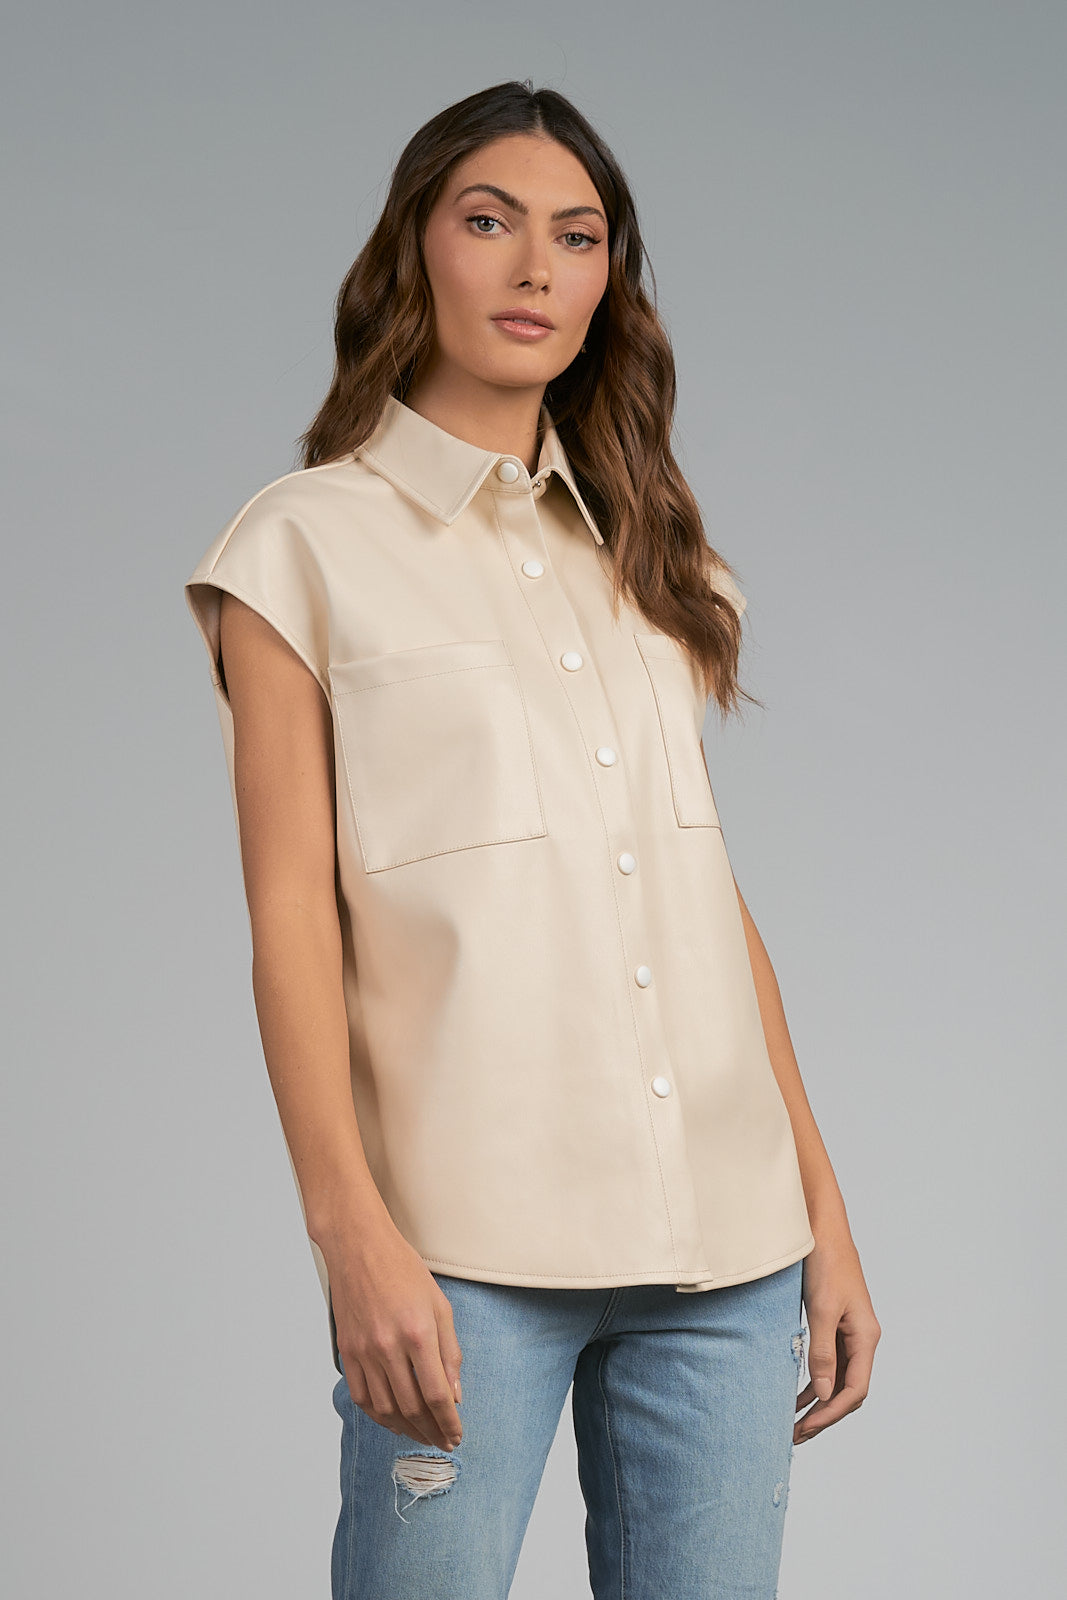 Cap Sleeve Faux Leather Top